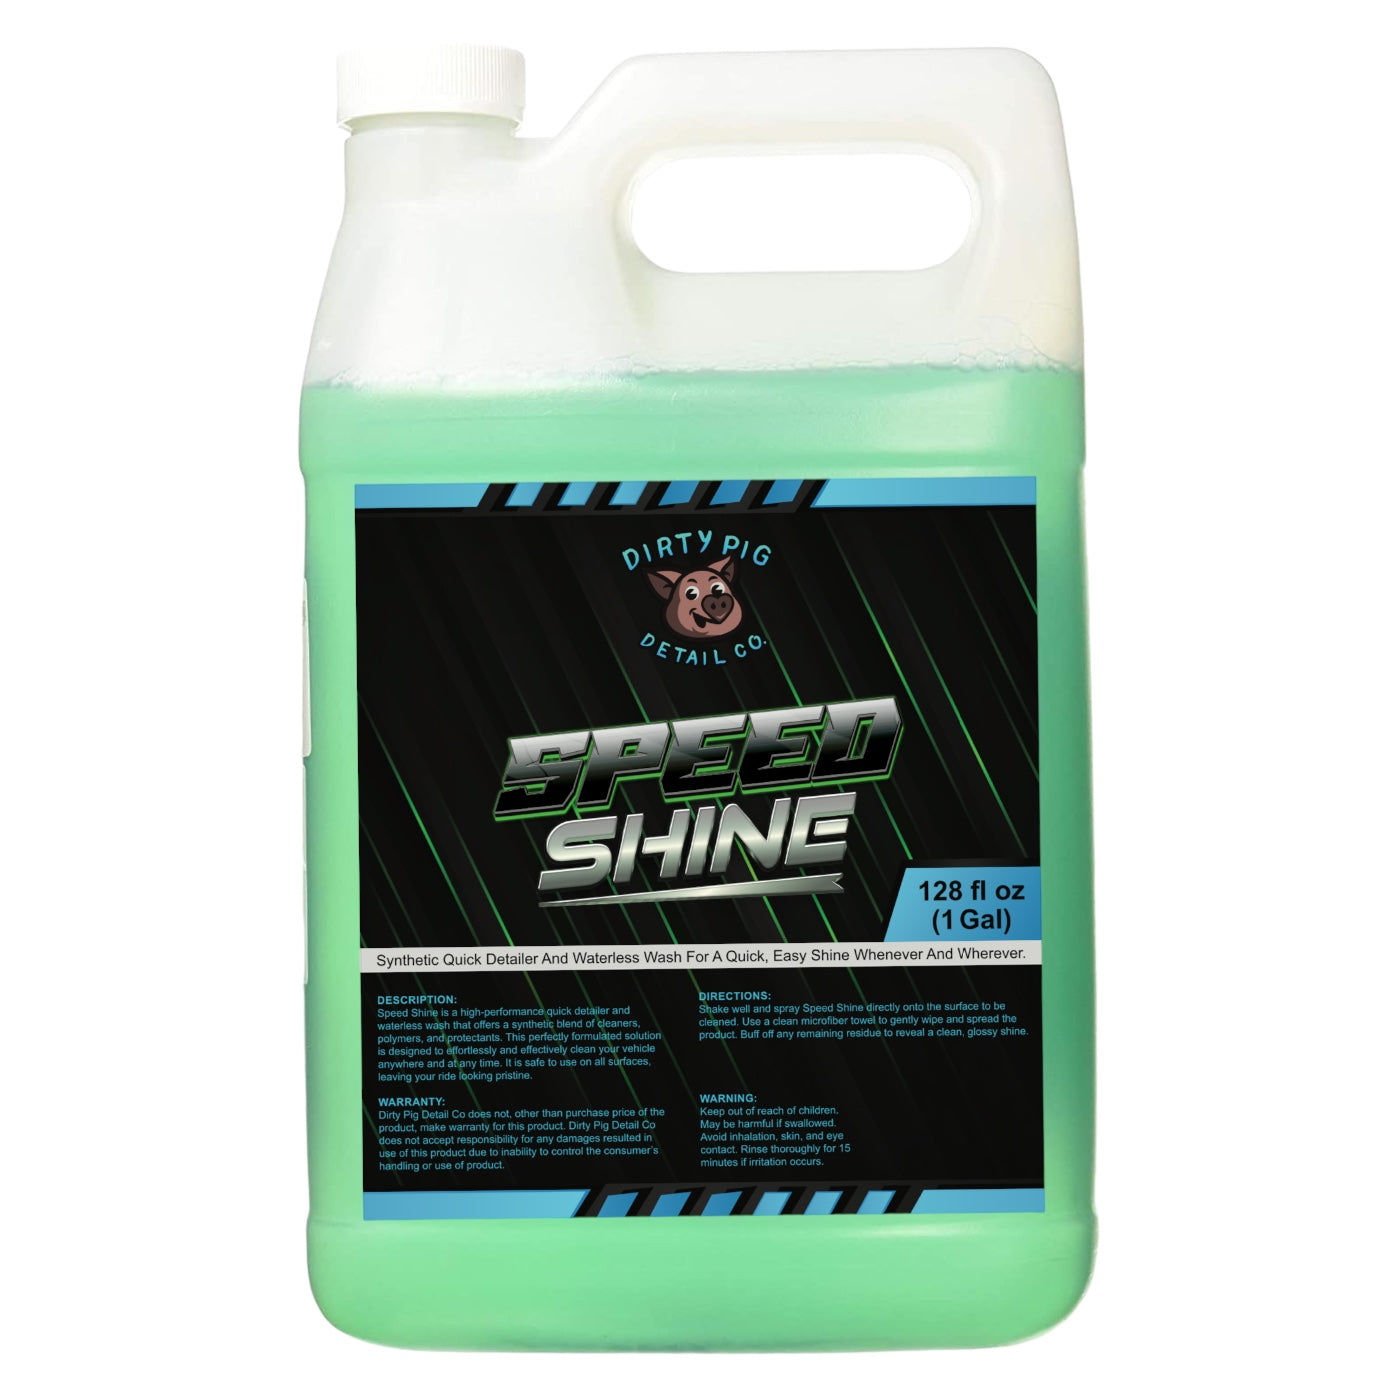 Speed Shine Synthetic Detailer